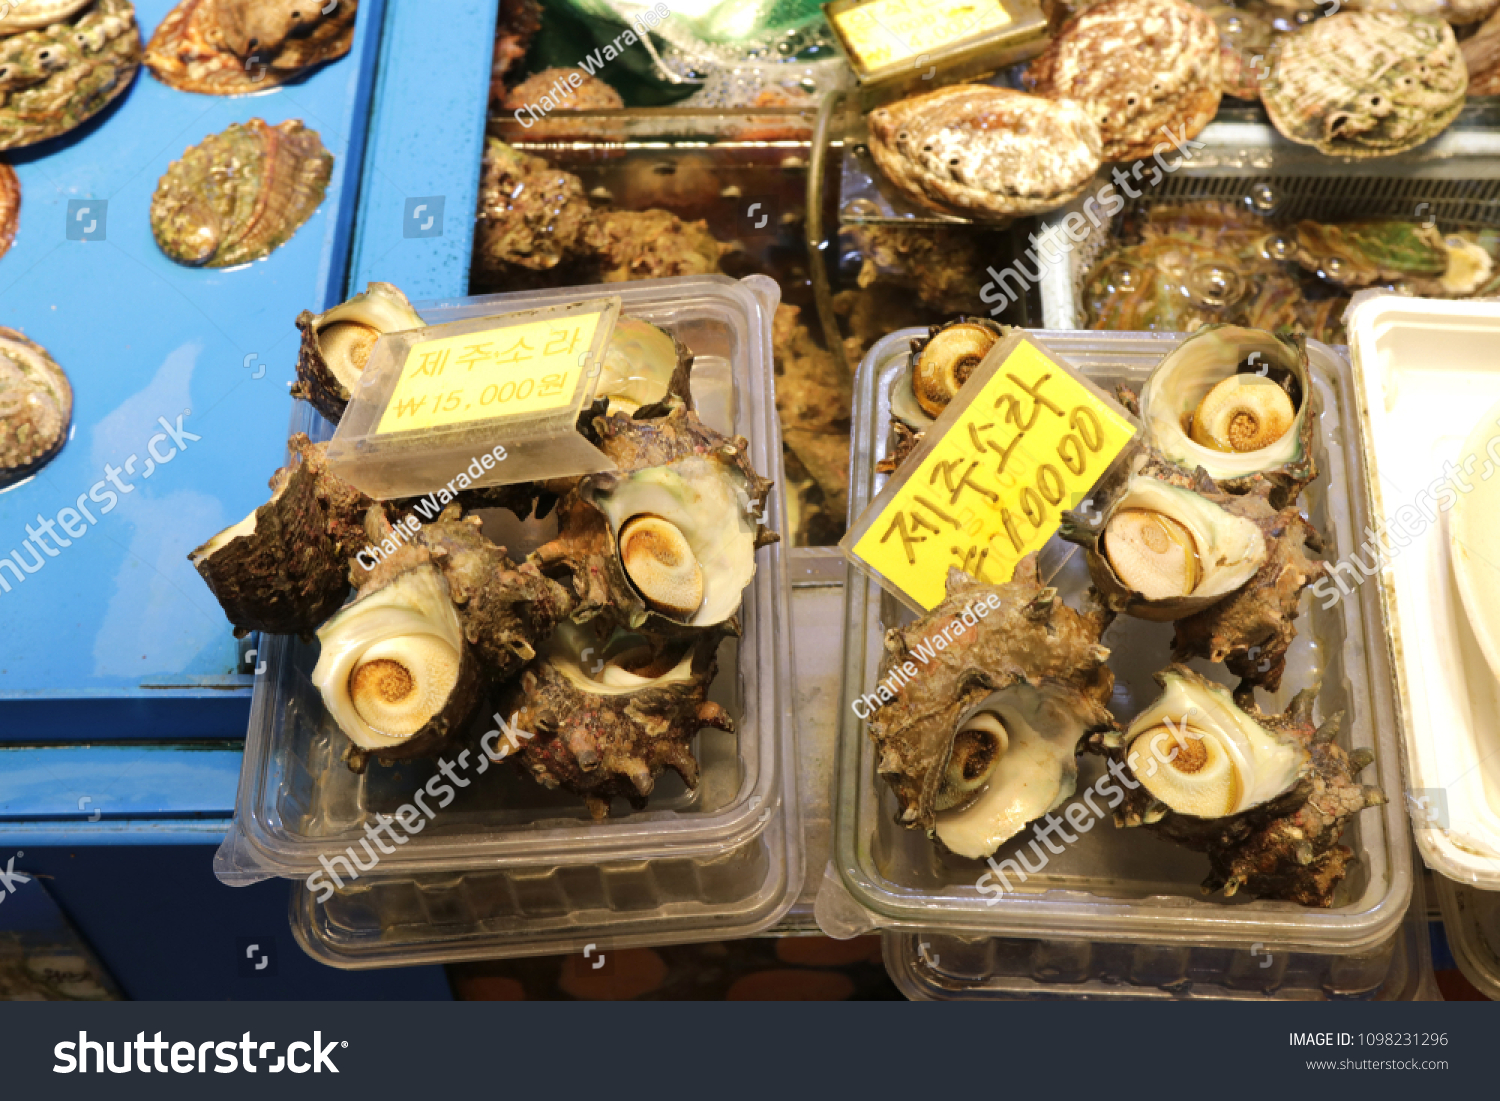 Fresh turban shells on display at famous Dongmun Traditional Market in Jeju Island,South Korea . The food label shows name of turban shells and price tag .
 #1098231296